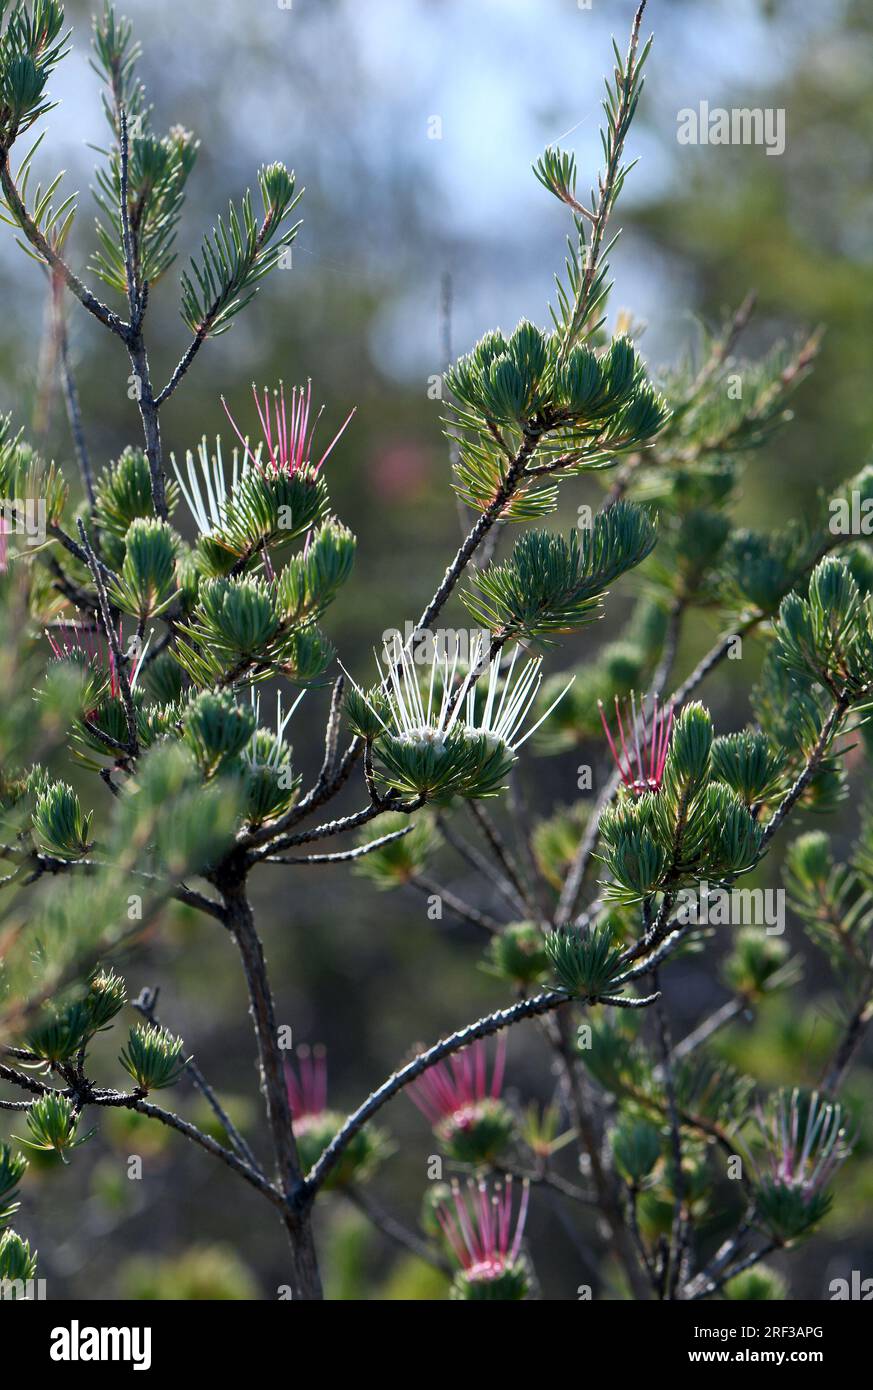 Back lit white, pink and red flowers with prominent stamens of the Australian native Clustered Scent Myrtle, Darwinia fascicularis, family Myrtaceae, Stock Photo